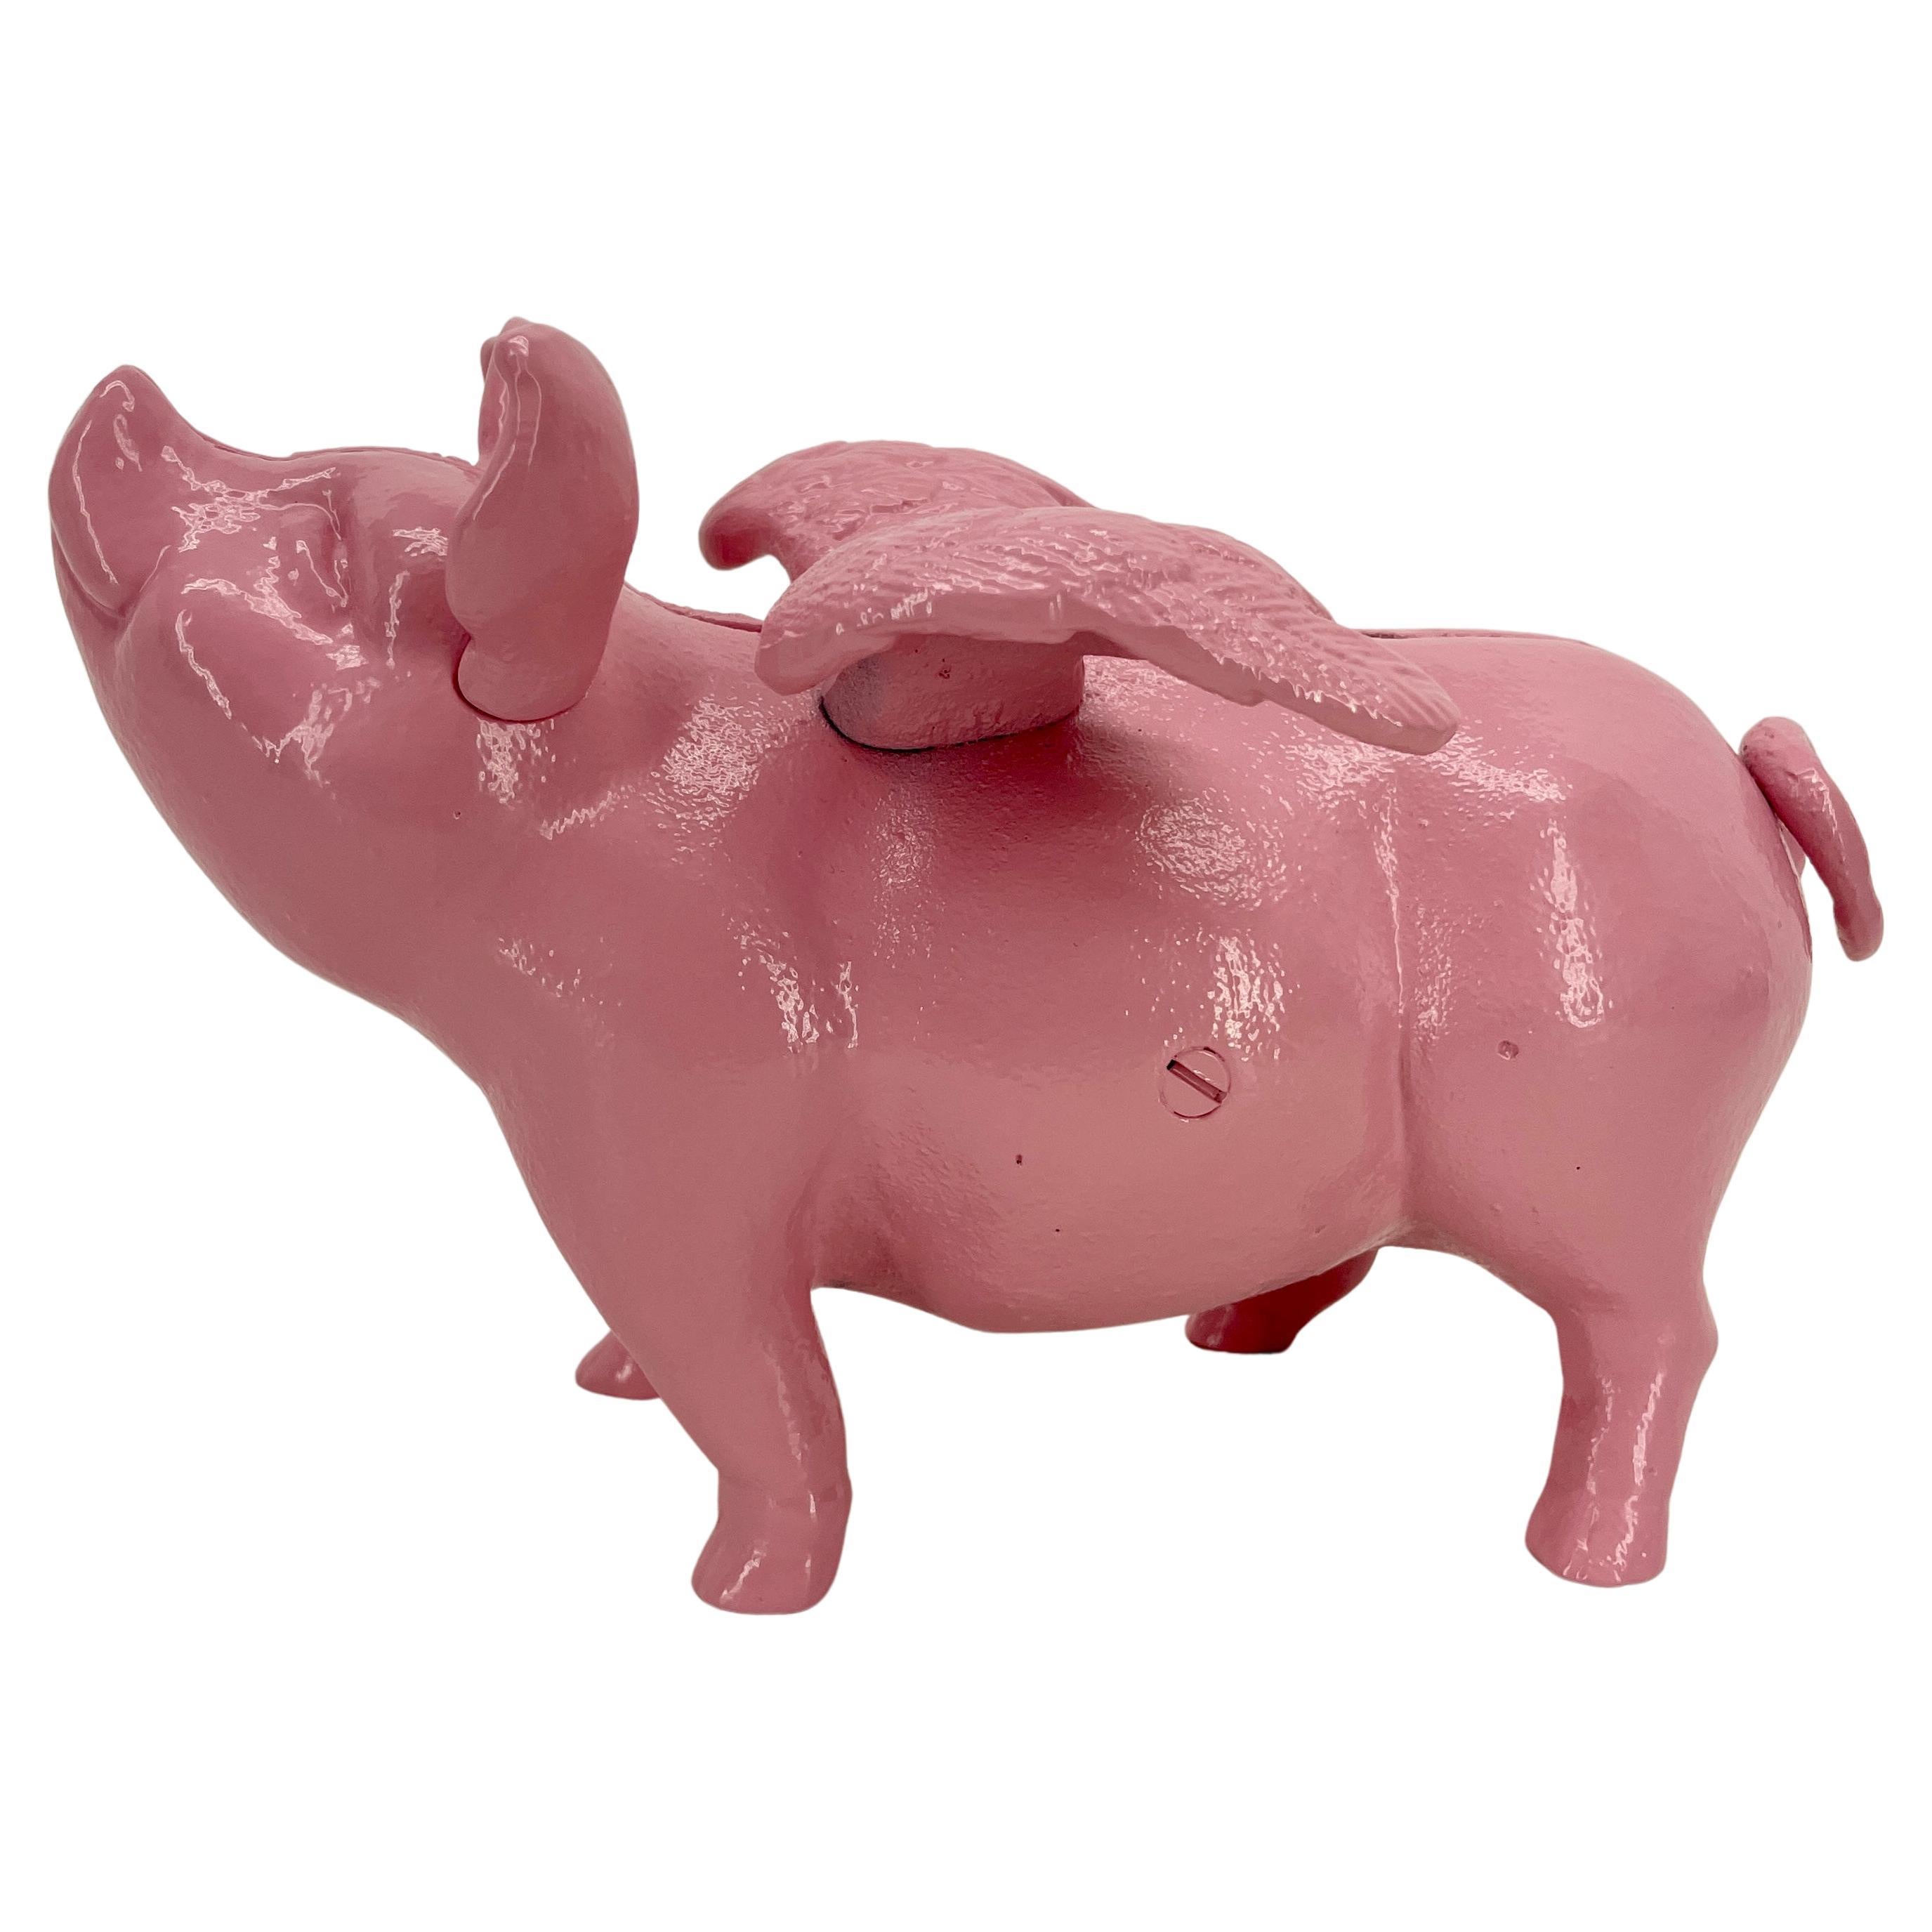 Danish piggy pink cast iron money bank or doorstopper with wings.
This smiling and charming Lady Pig is newly powder-coated in 